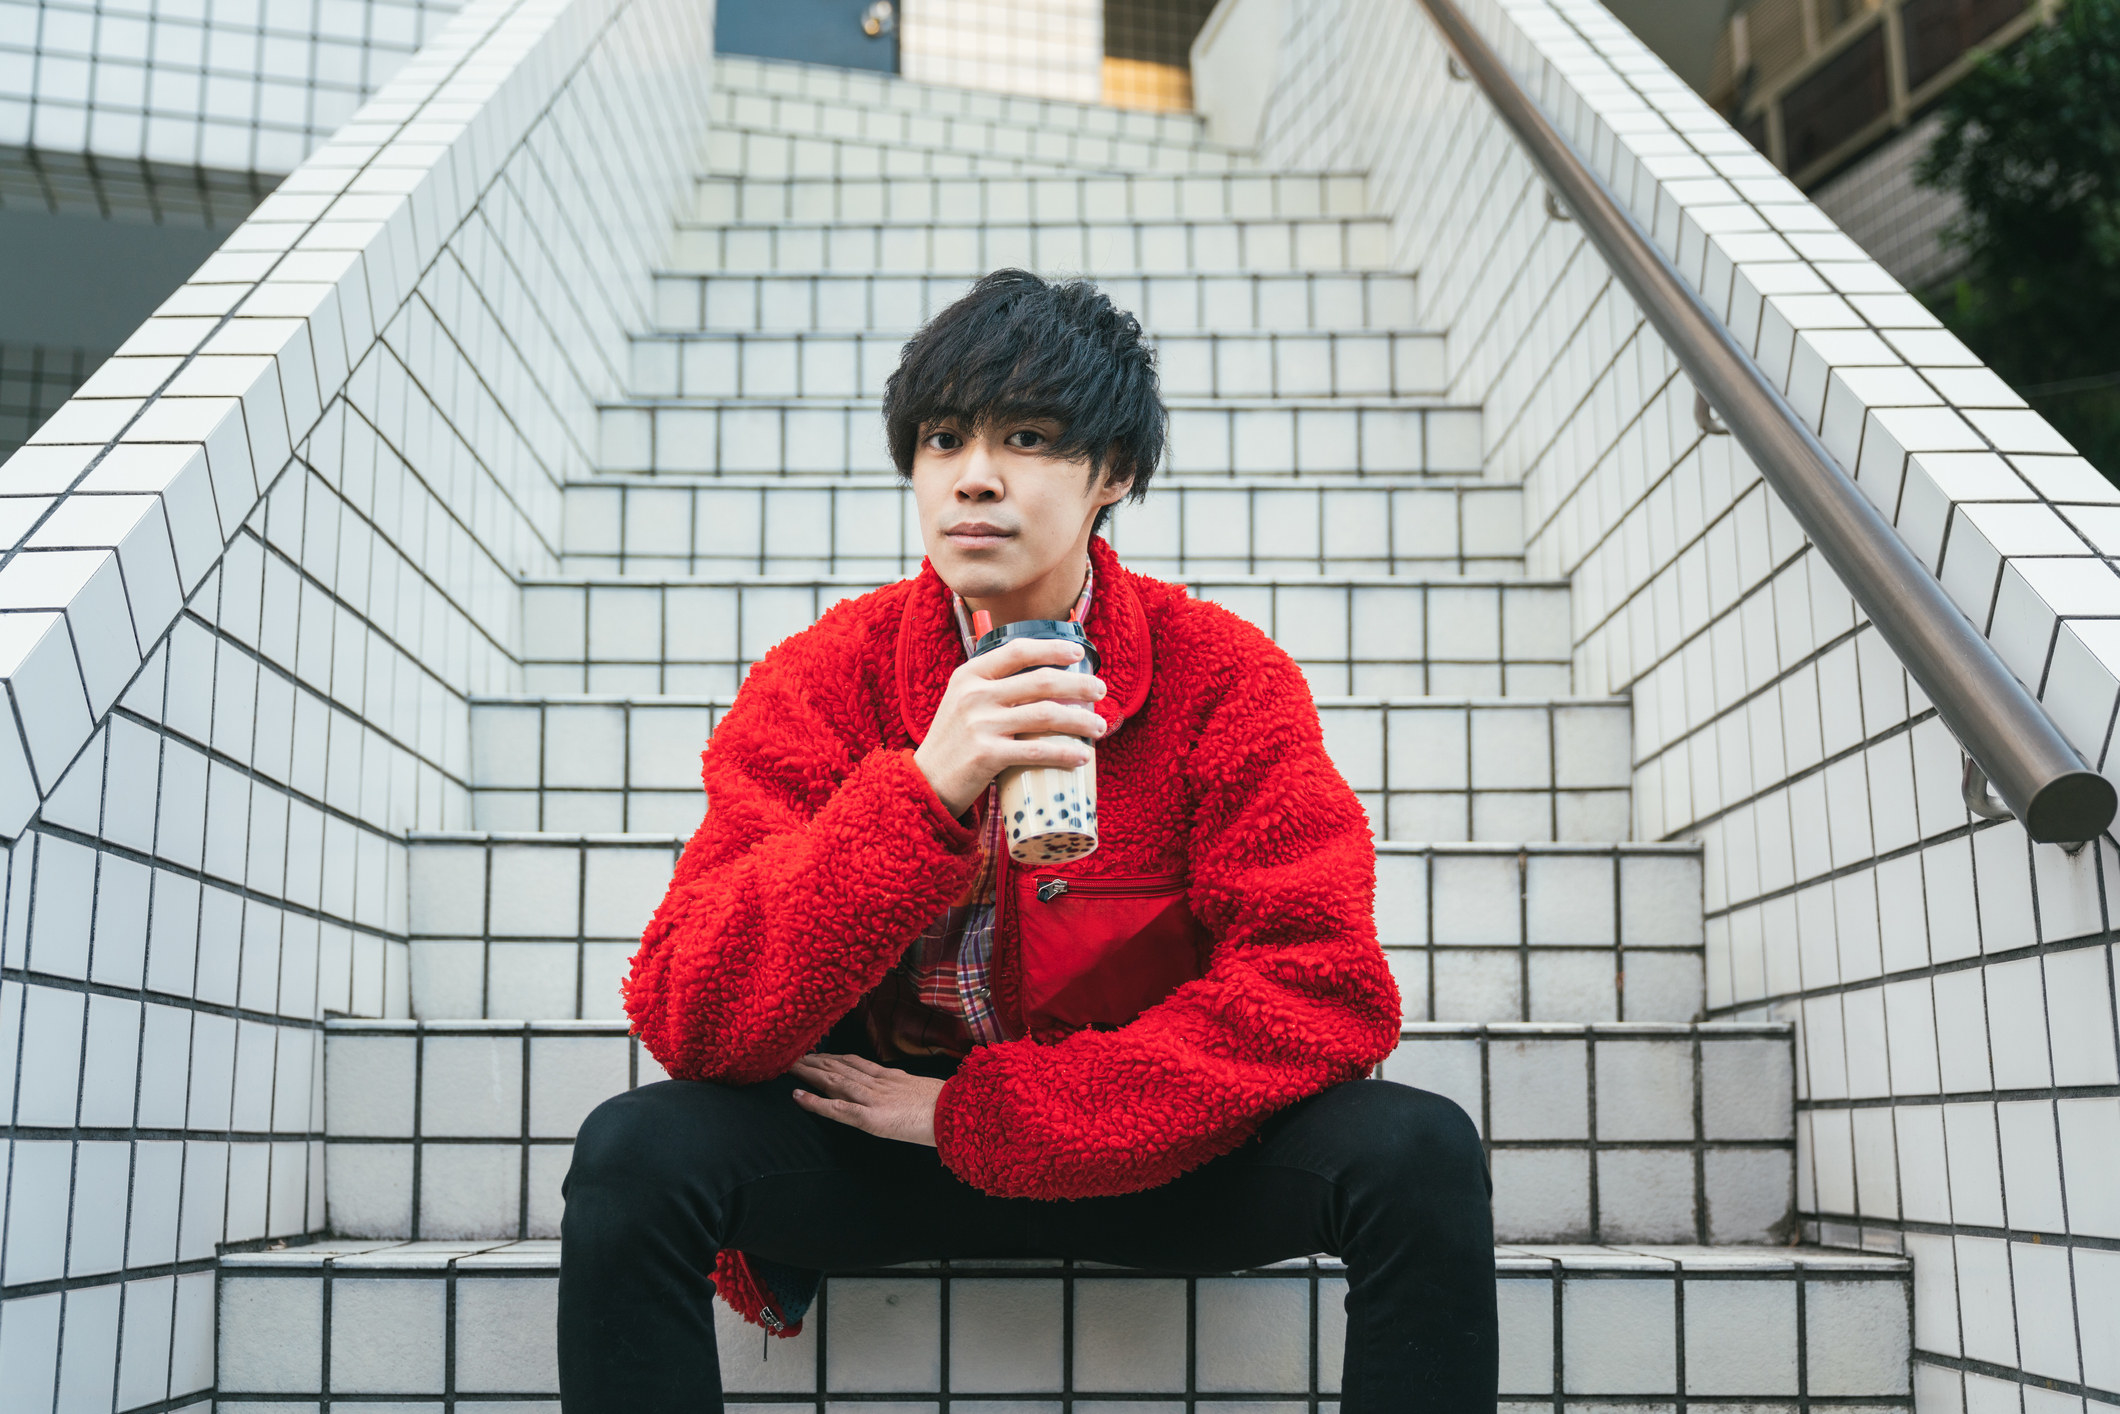 A guy sitting on steps and drinking boba tea